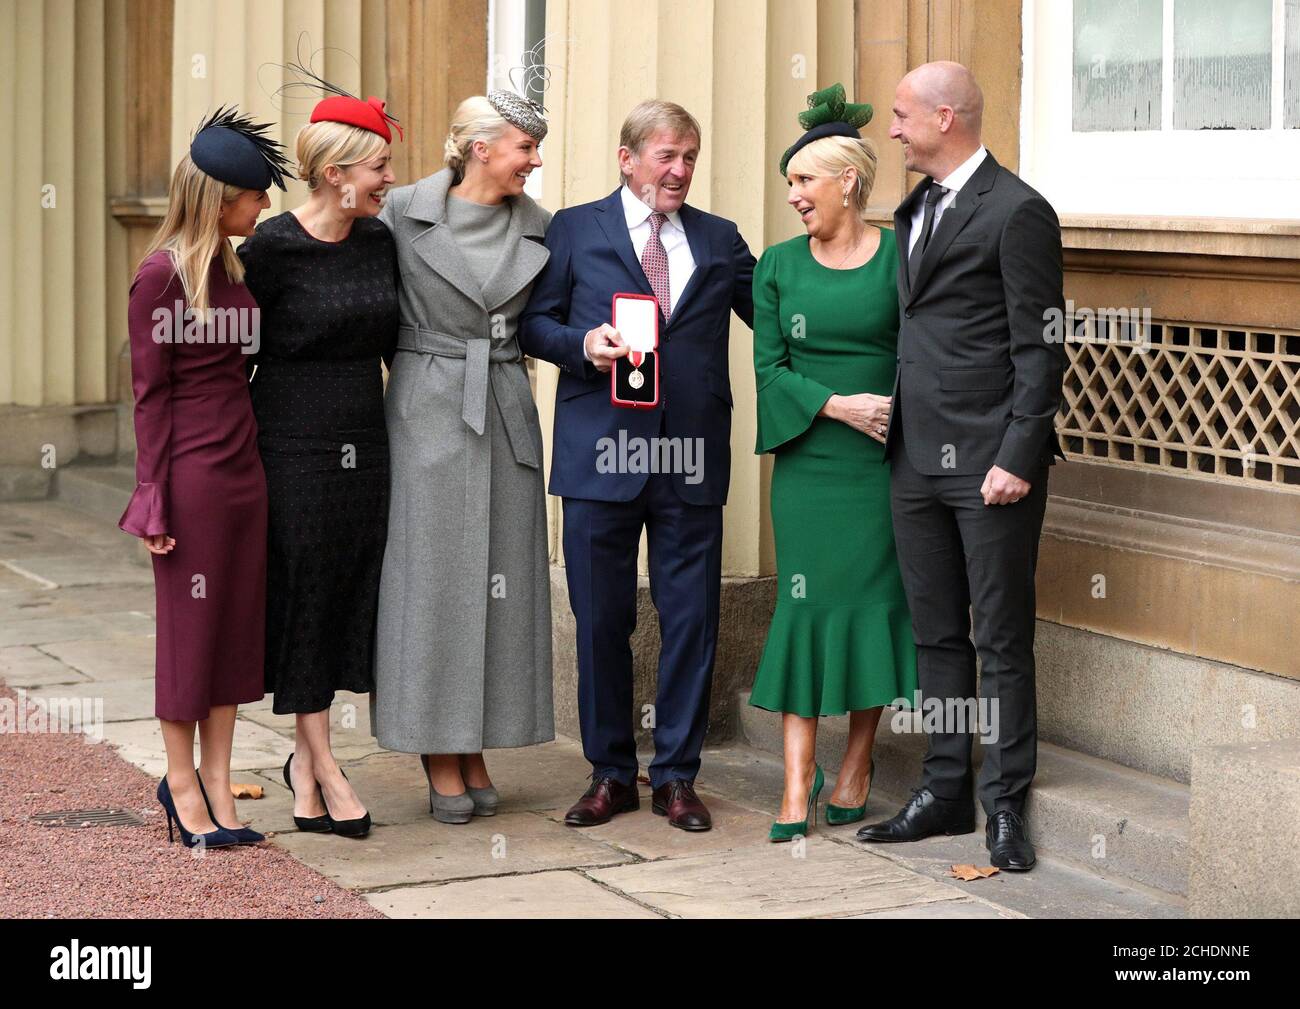 Liverpool legend Sir Kenny Dalglish with his family after being knighted at an investiture ceremony at Buckingham Palace, London. Stock Photo